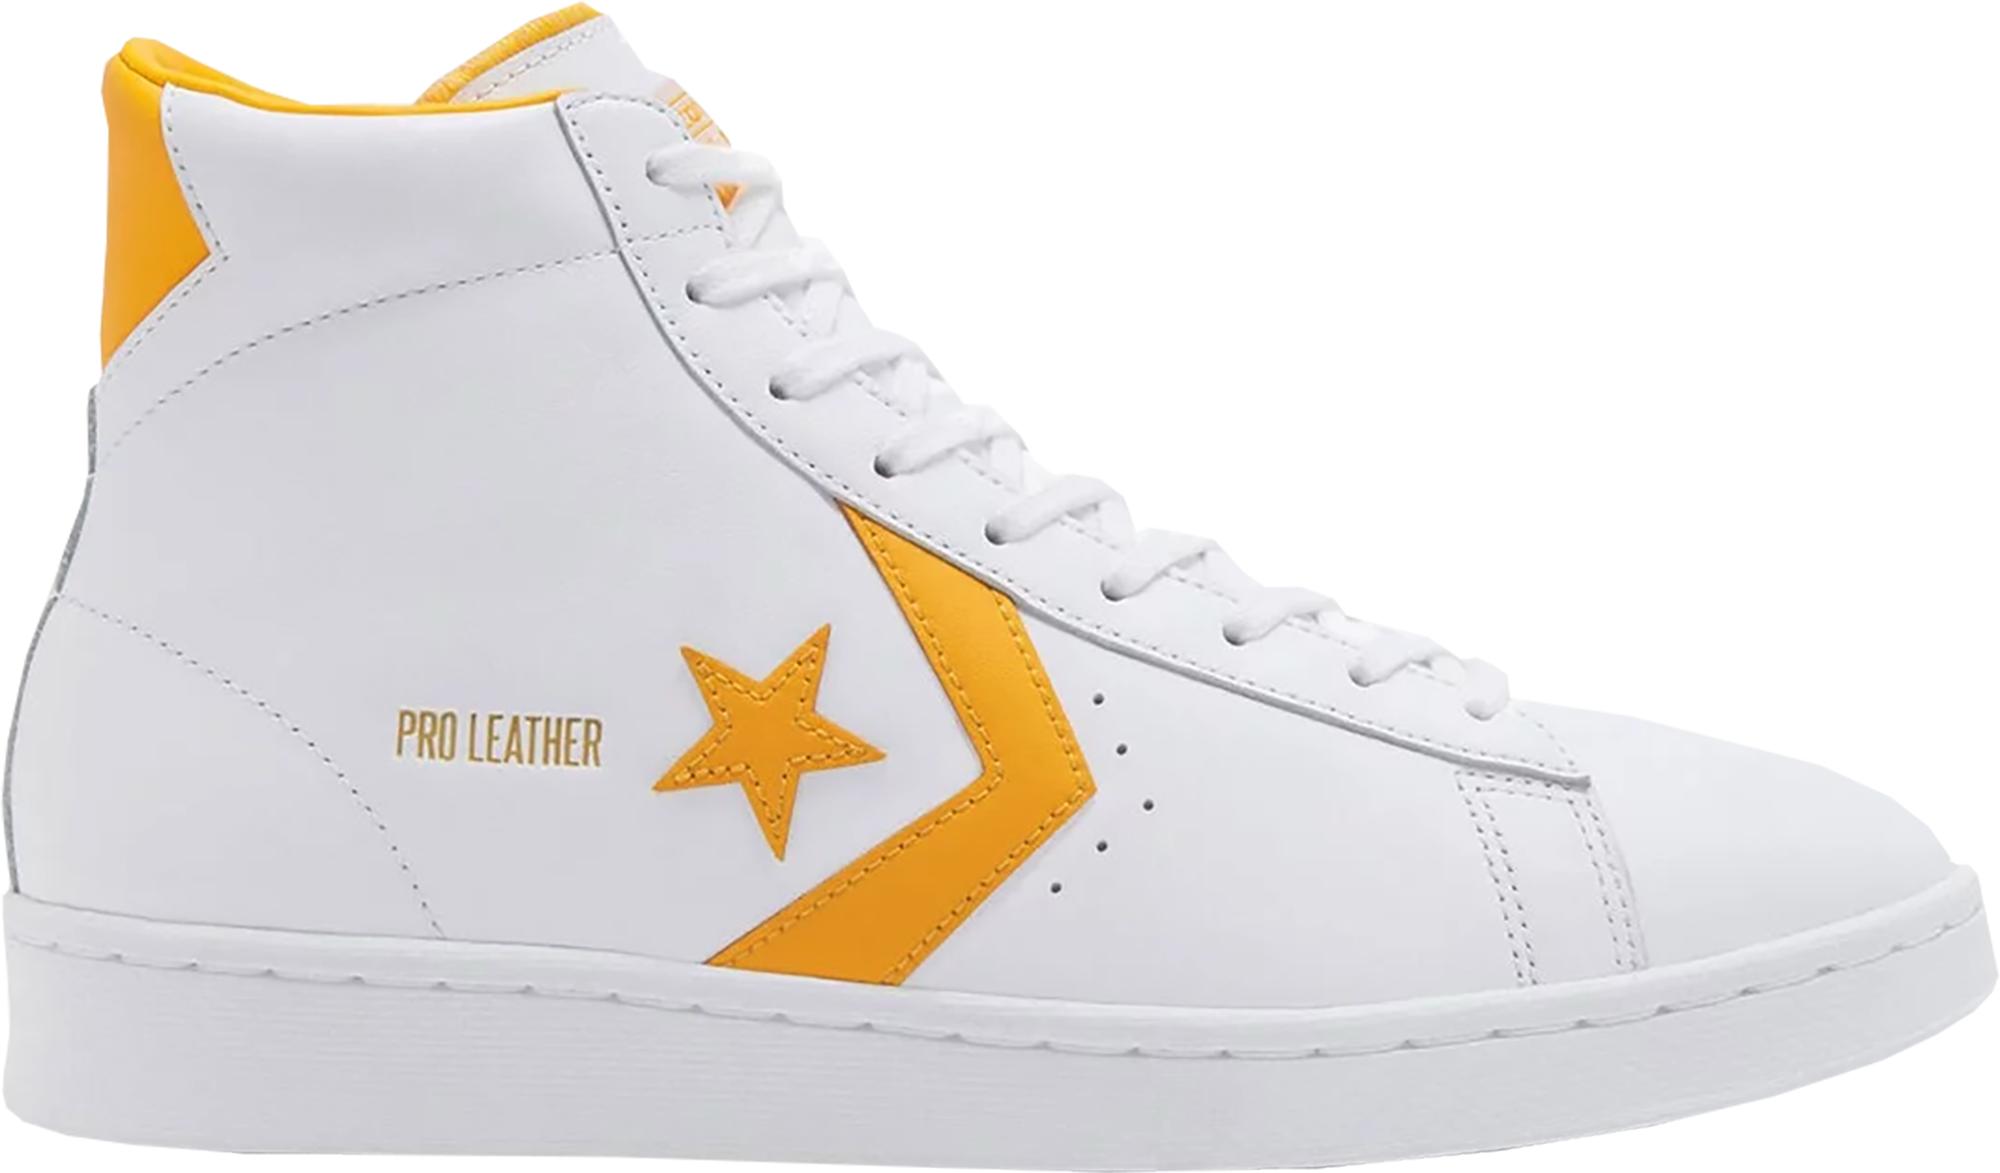 converse leather yellow